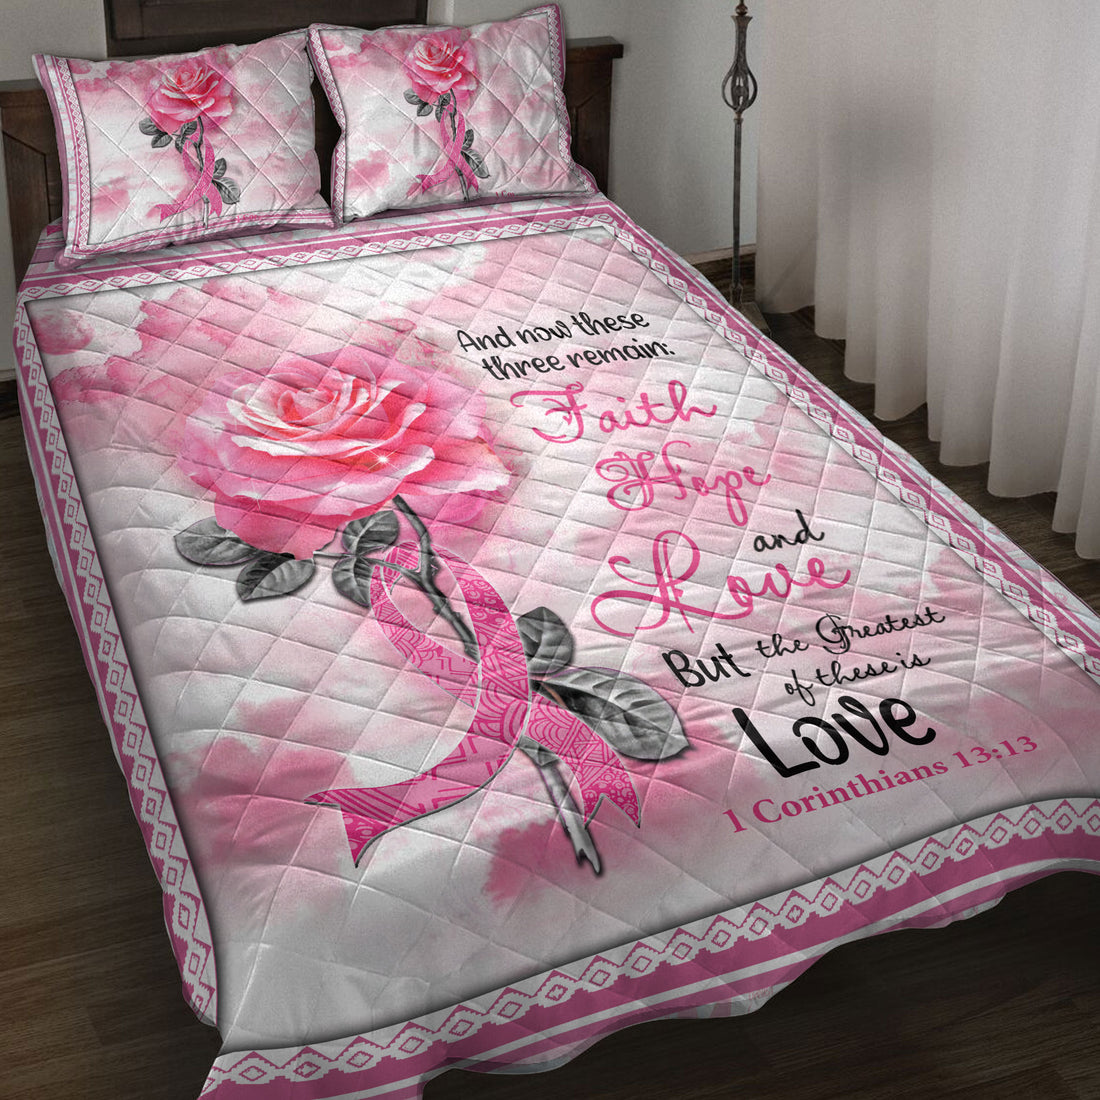 Ohaprints-Quilt-Bed-Set-Pillowcase-Breast-Cancer-Awareness-Pink-Bc-Support-Rose-Faith-Hope-Love-Blanket-Bedspread-Bedding-3867-Throw (55'' x 60'')